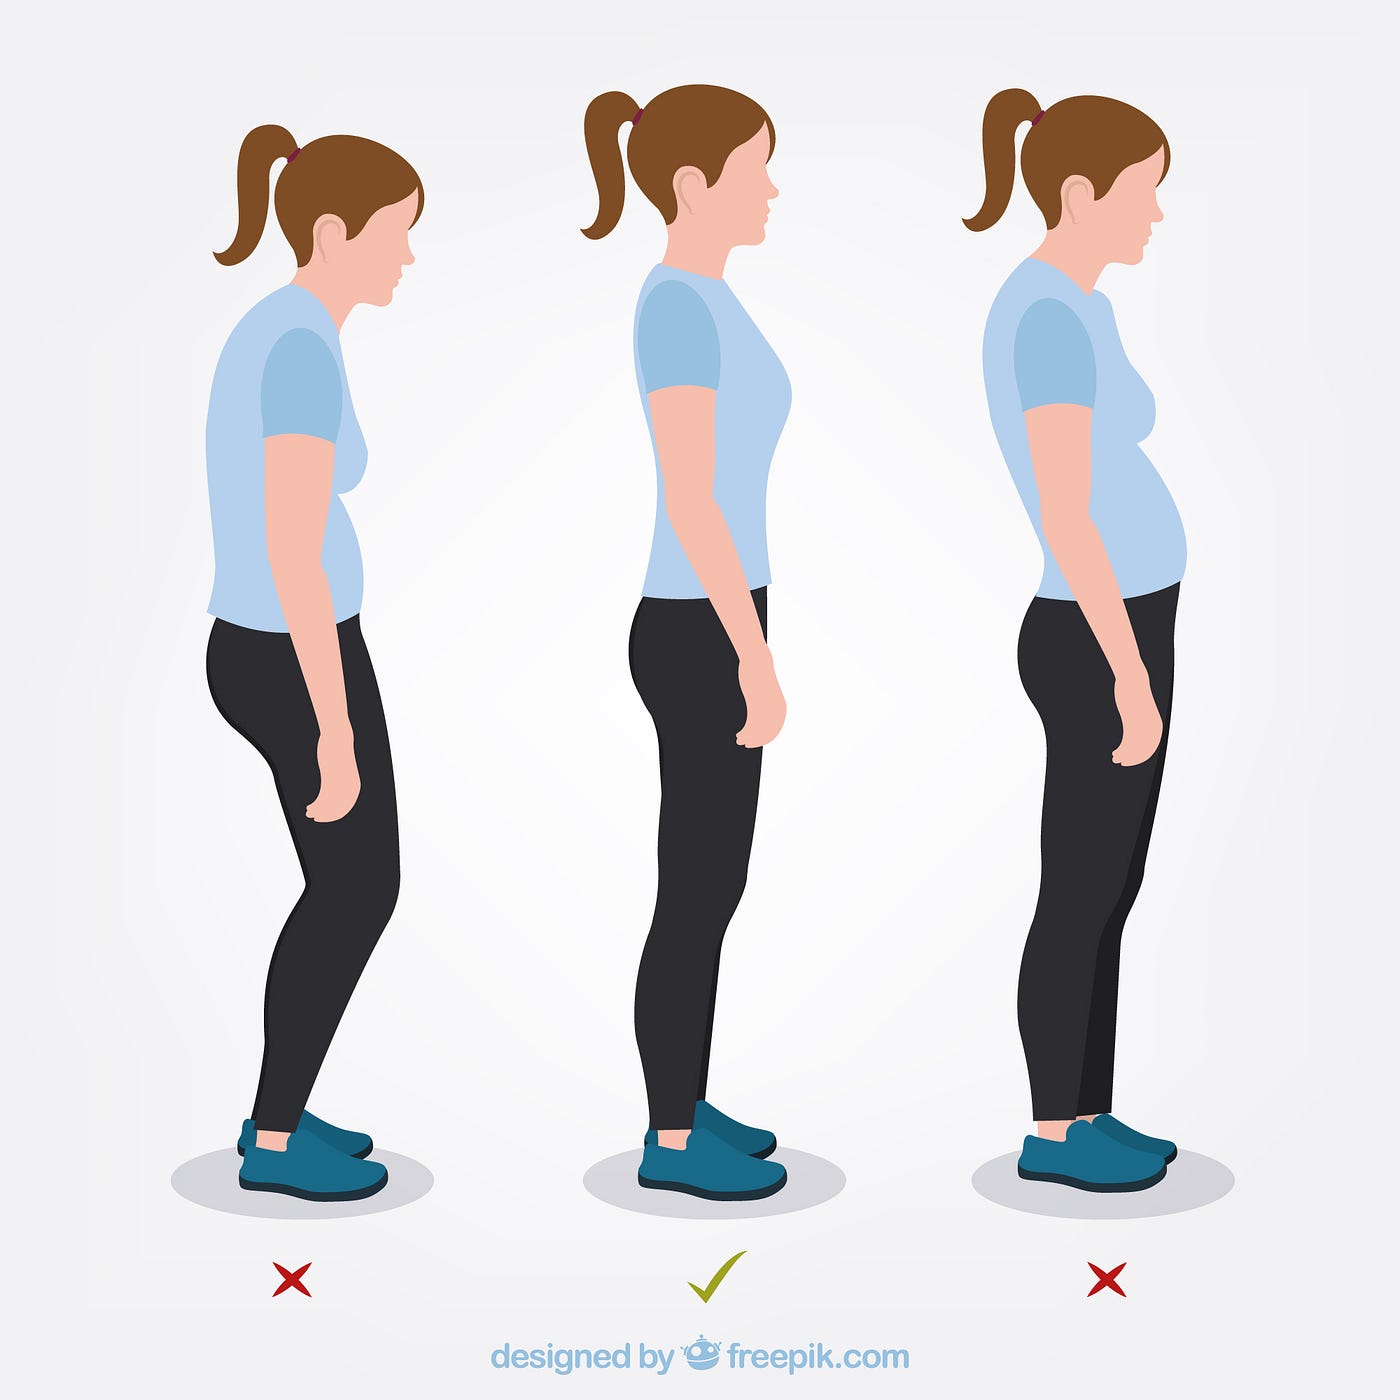 Why an upright posture is key to your health?, by Aesha Tahir